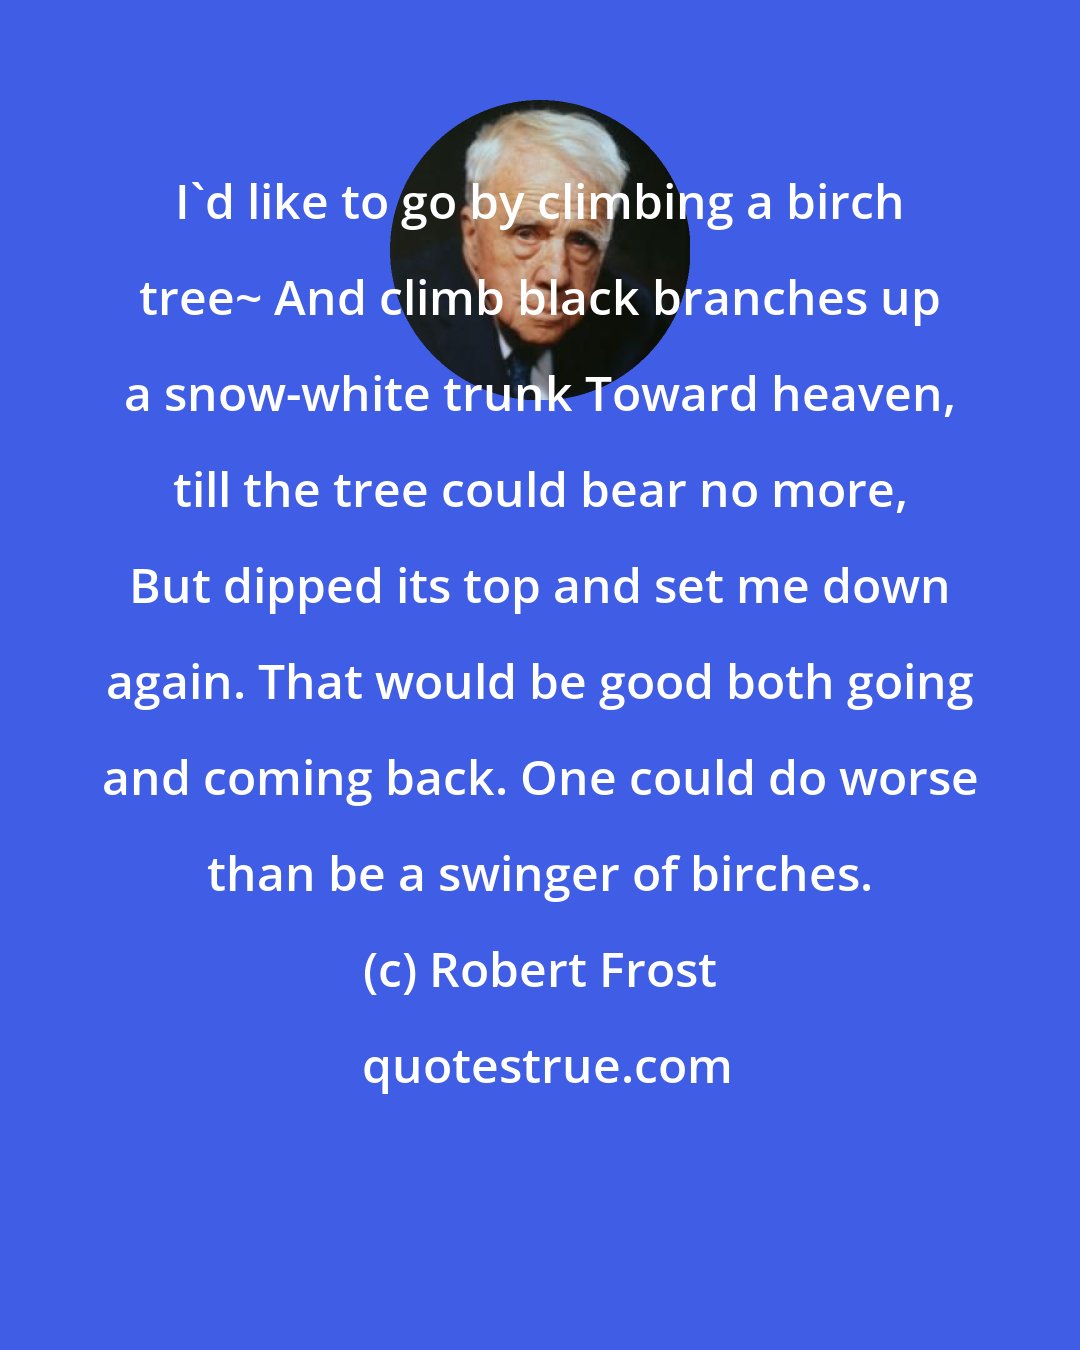 Robert Frost: I'd like to go by climbing a birch tree~ And climb black branches up a snow-white trunk Toward heaven, till the tree could bear no more, But dipped its top and set me down again. That would be good both going and coming back. One could do worse than be a swinger of birches.